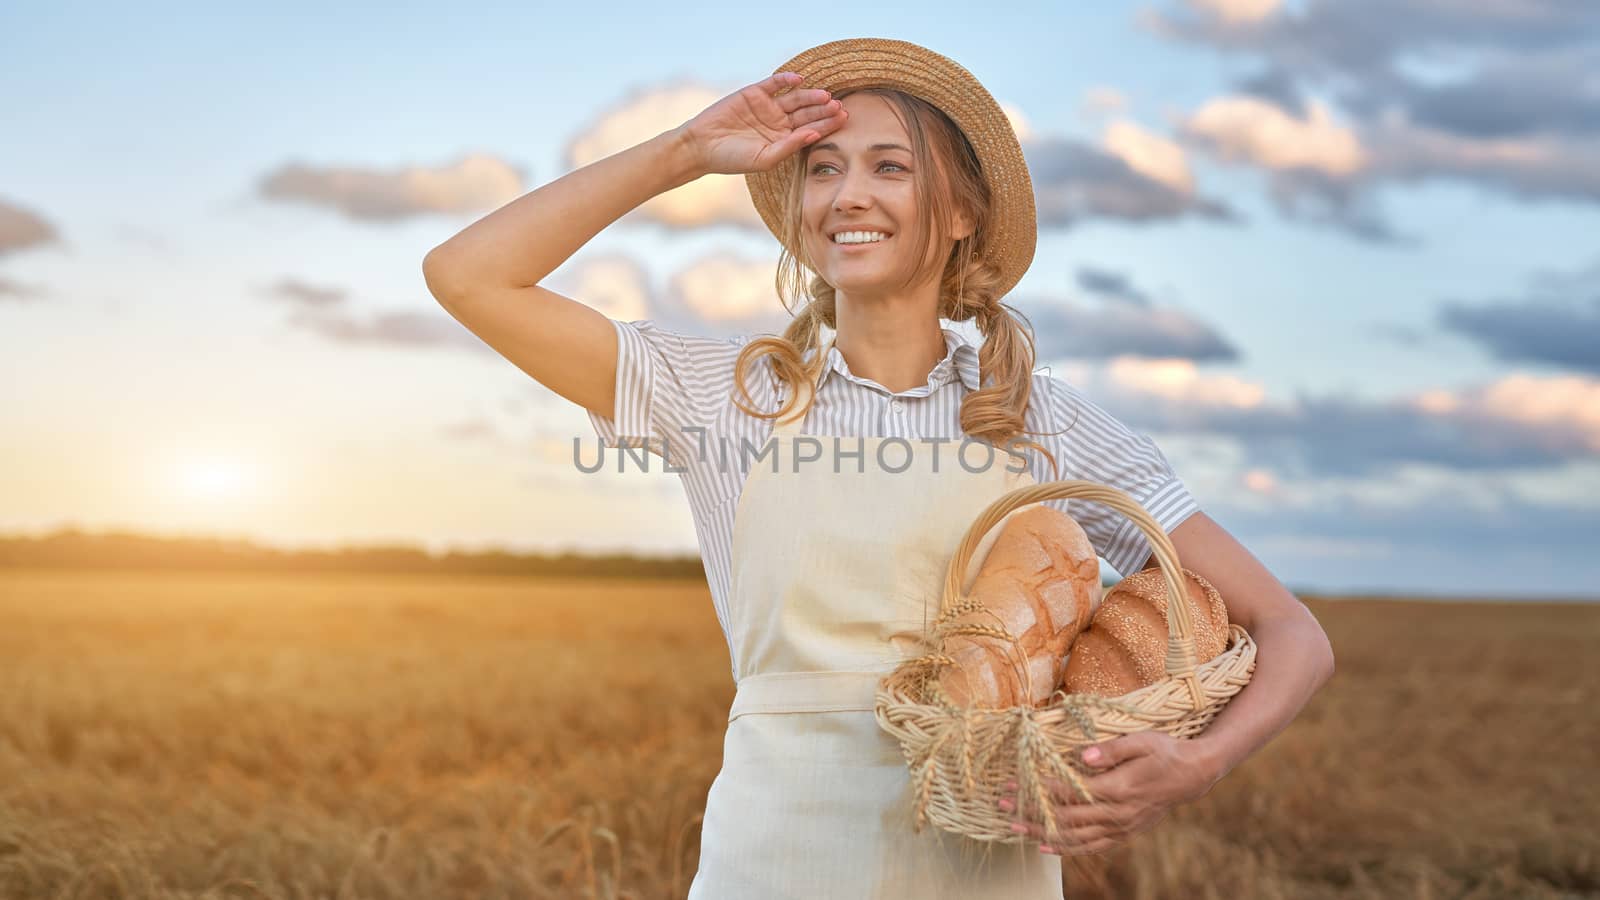 Woman baker holding wicker basket bread eco product Female farmer standing wheat agricultural field Baking small business Caucasian person dressed straw hat apron organic healthy food concept Banner